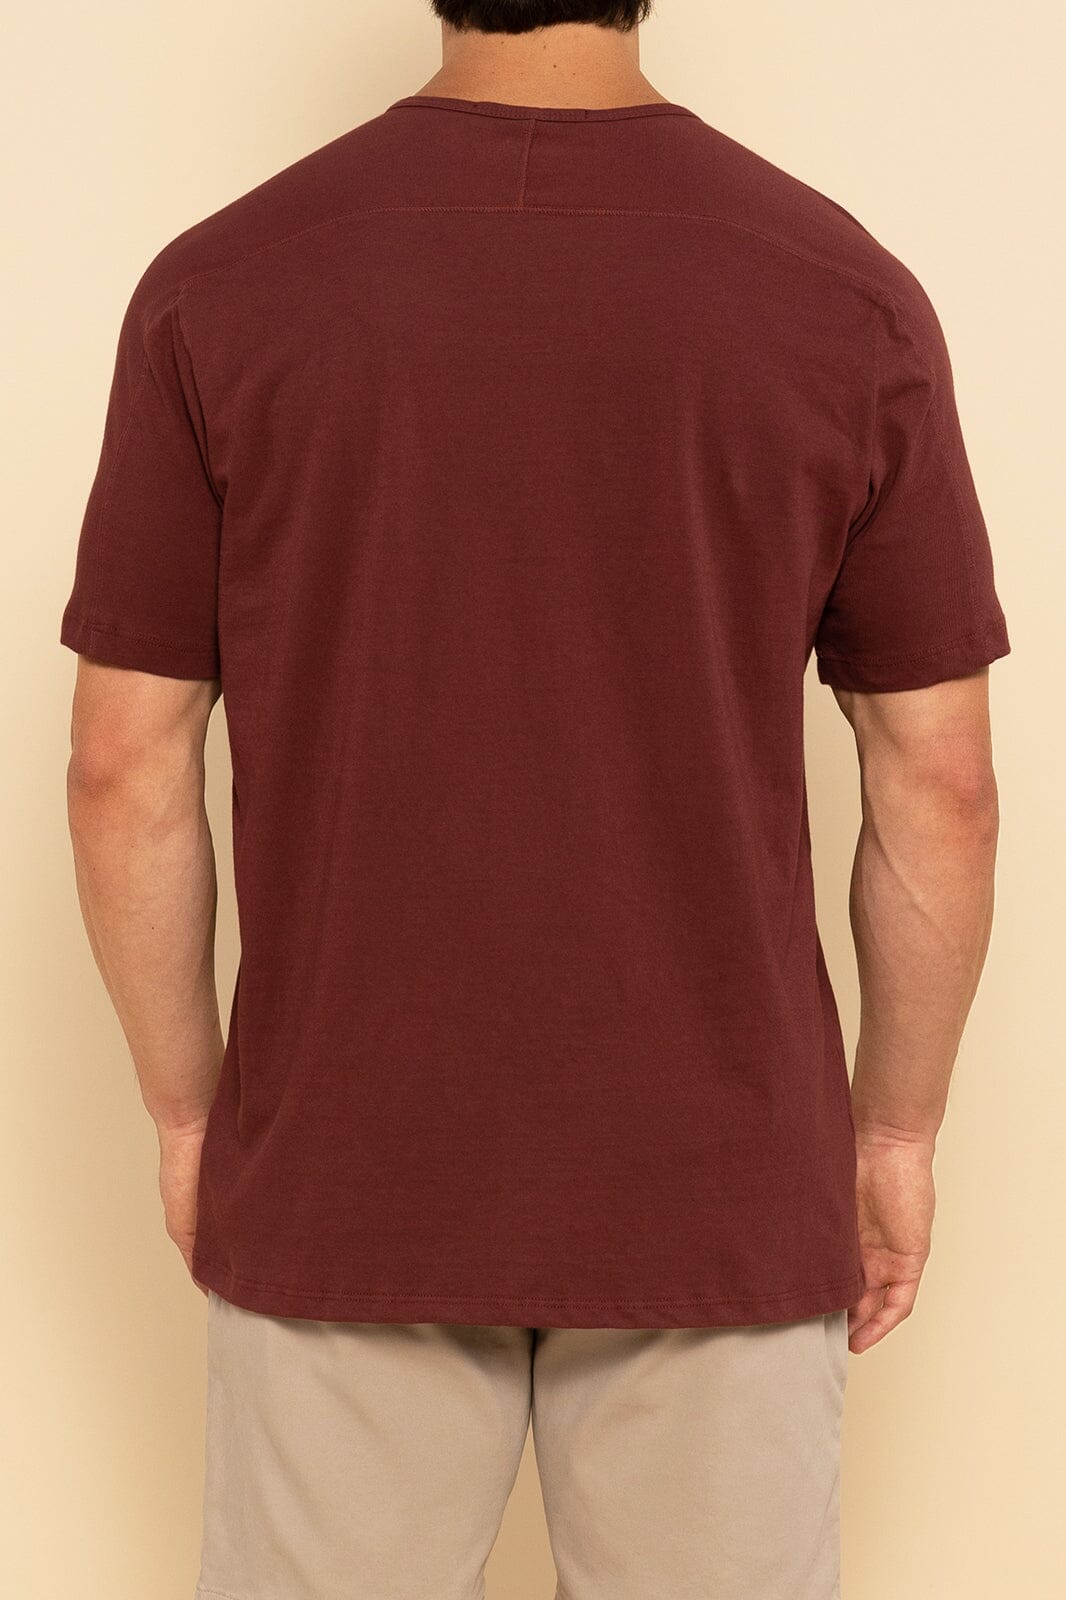 Maroon Notch Neck Tee For Men - Back Angle